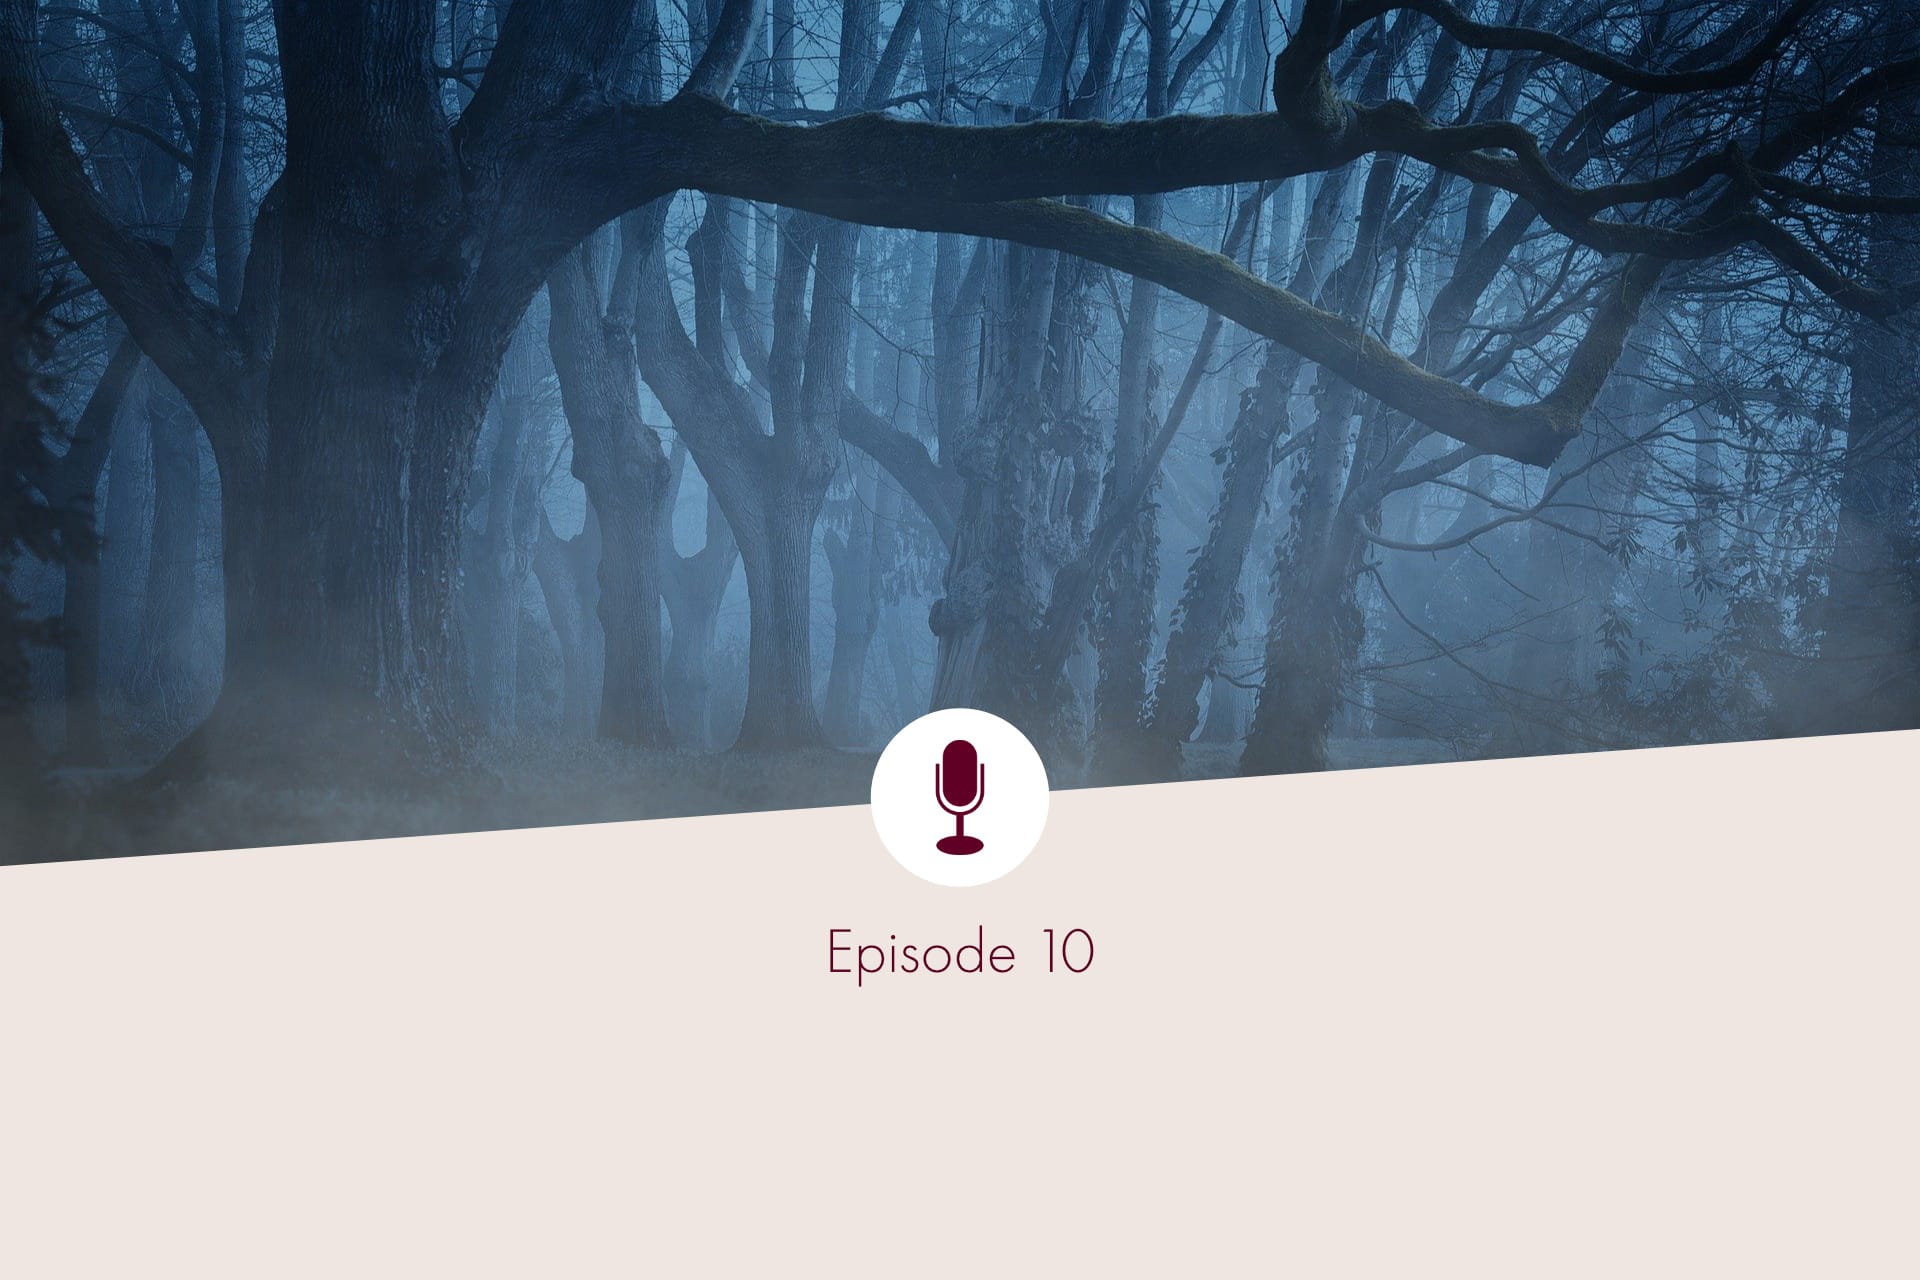 Picture of a mystical forest and captions "Episode 10"